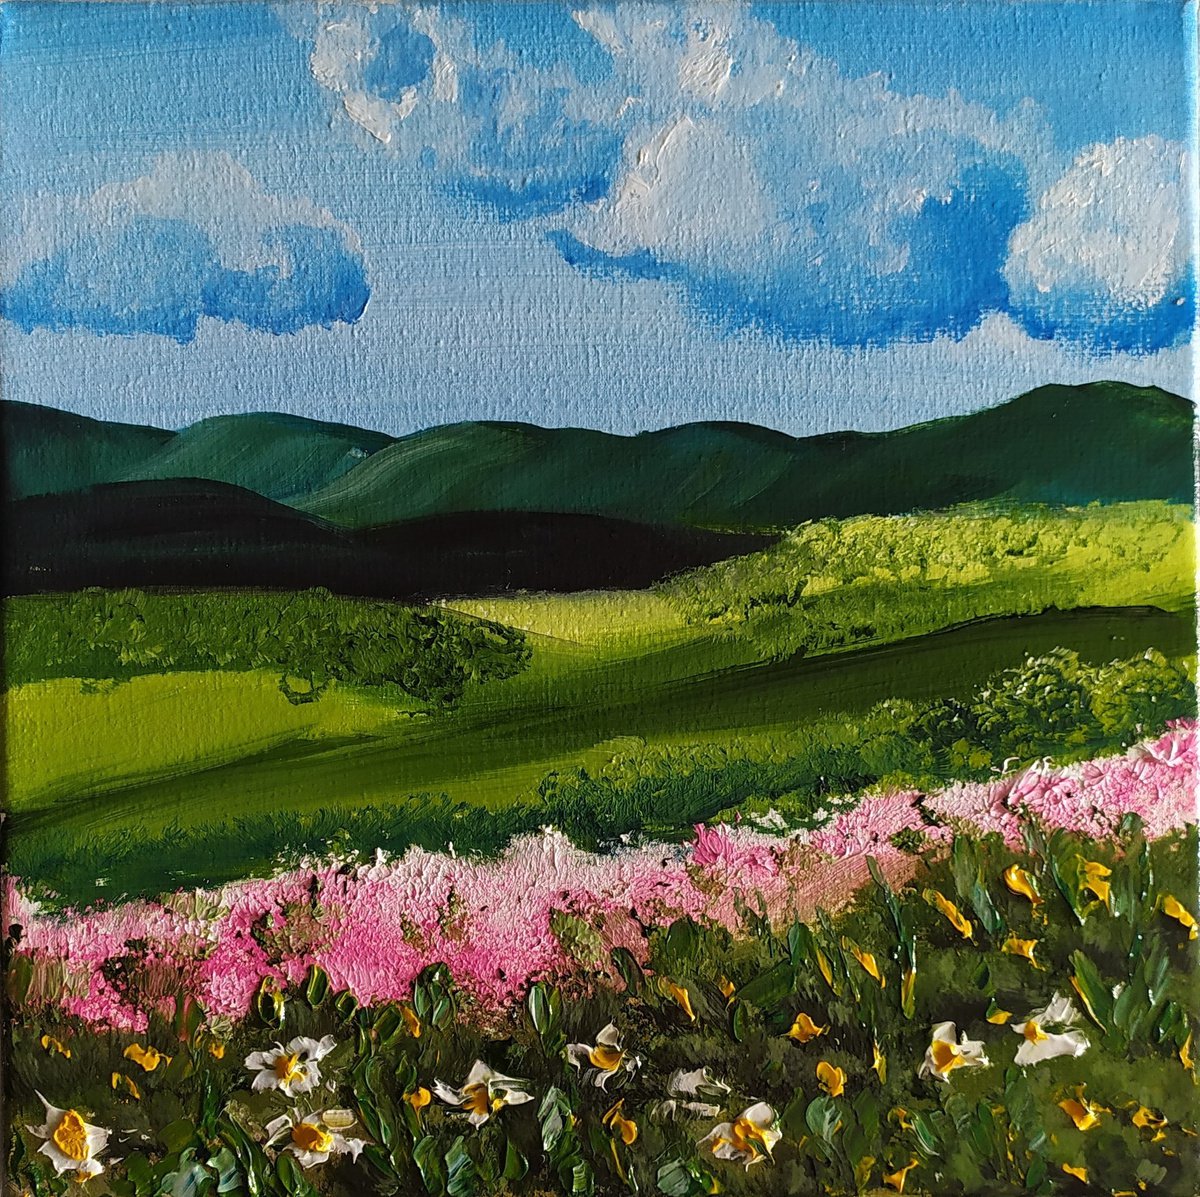 Under the clouds, original landscape field oil painting, gift idea by Nataliia Plakhotnyk